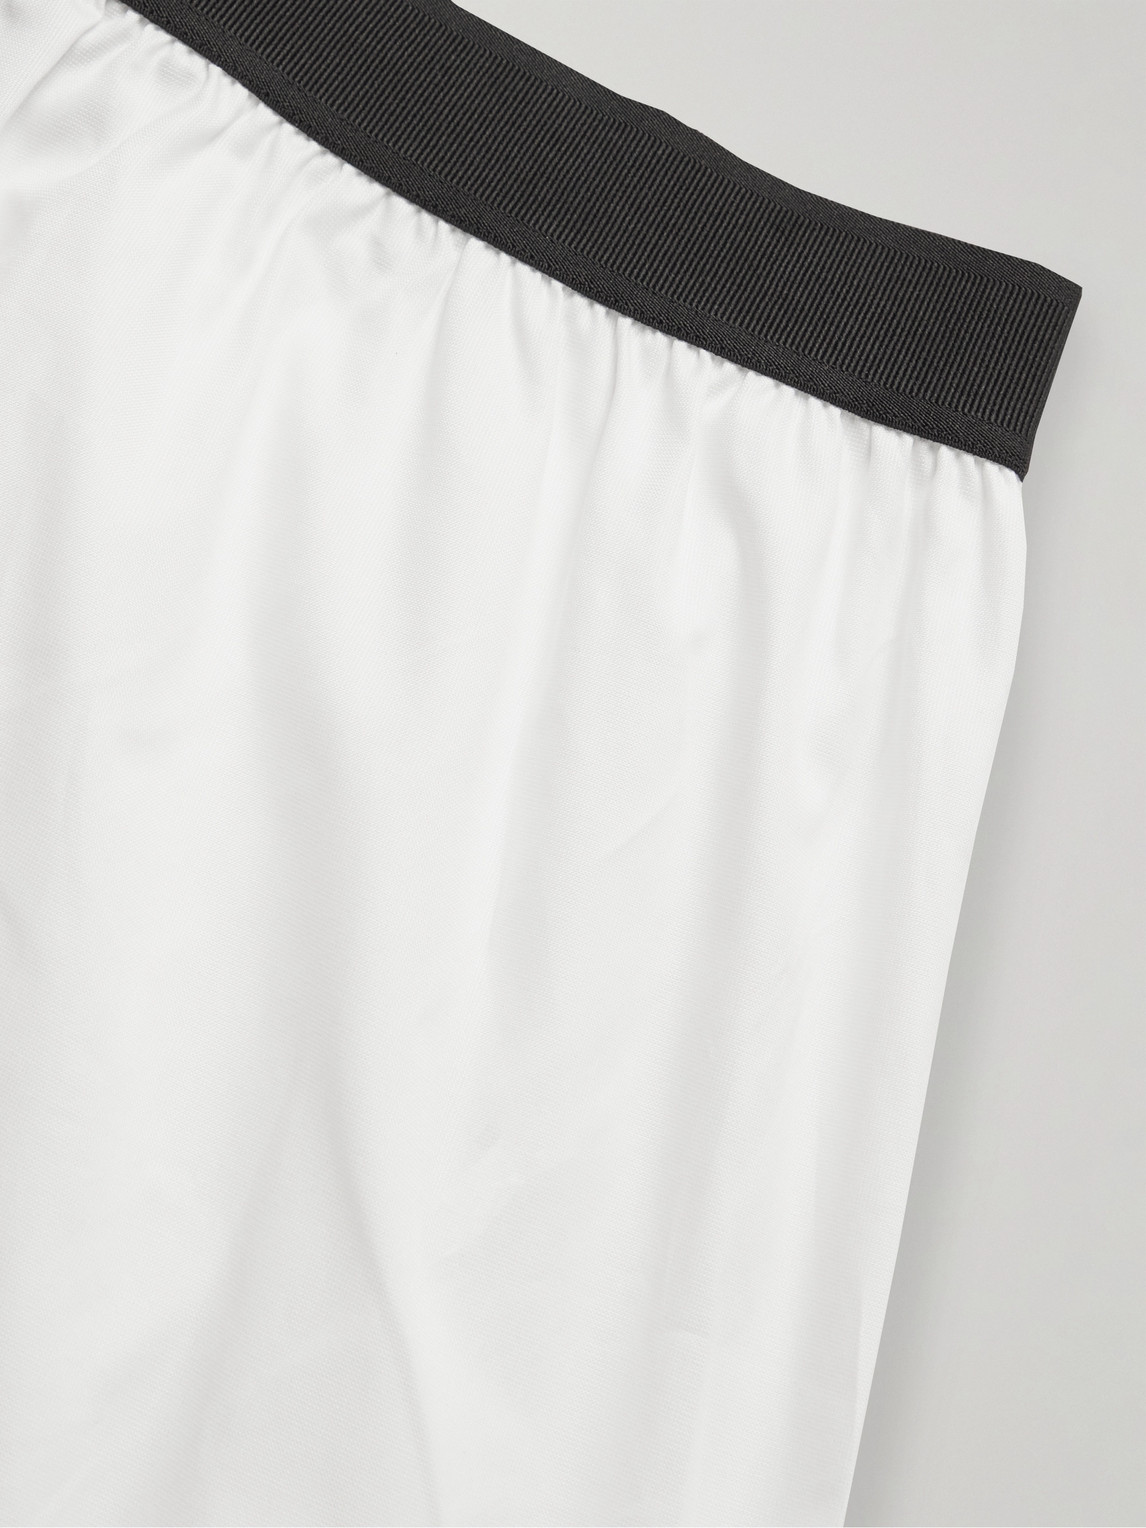 Shop Tom Ford Cotton Boxer Shorts In White